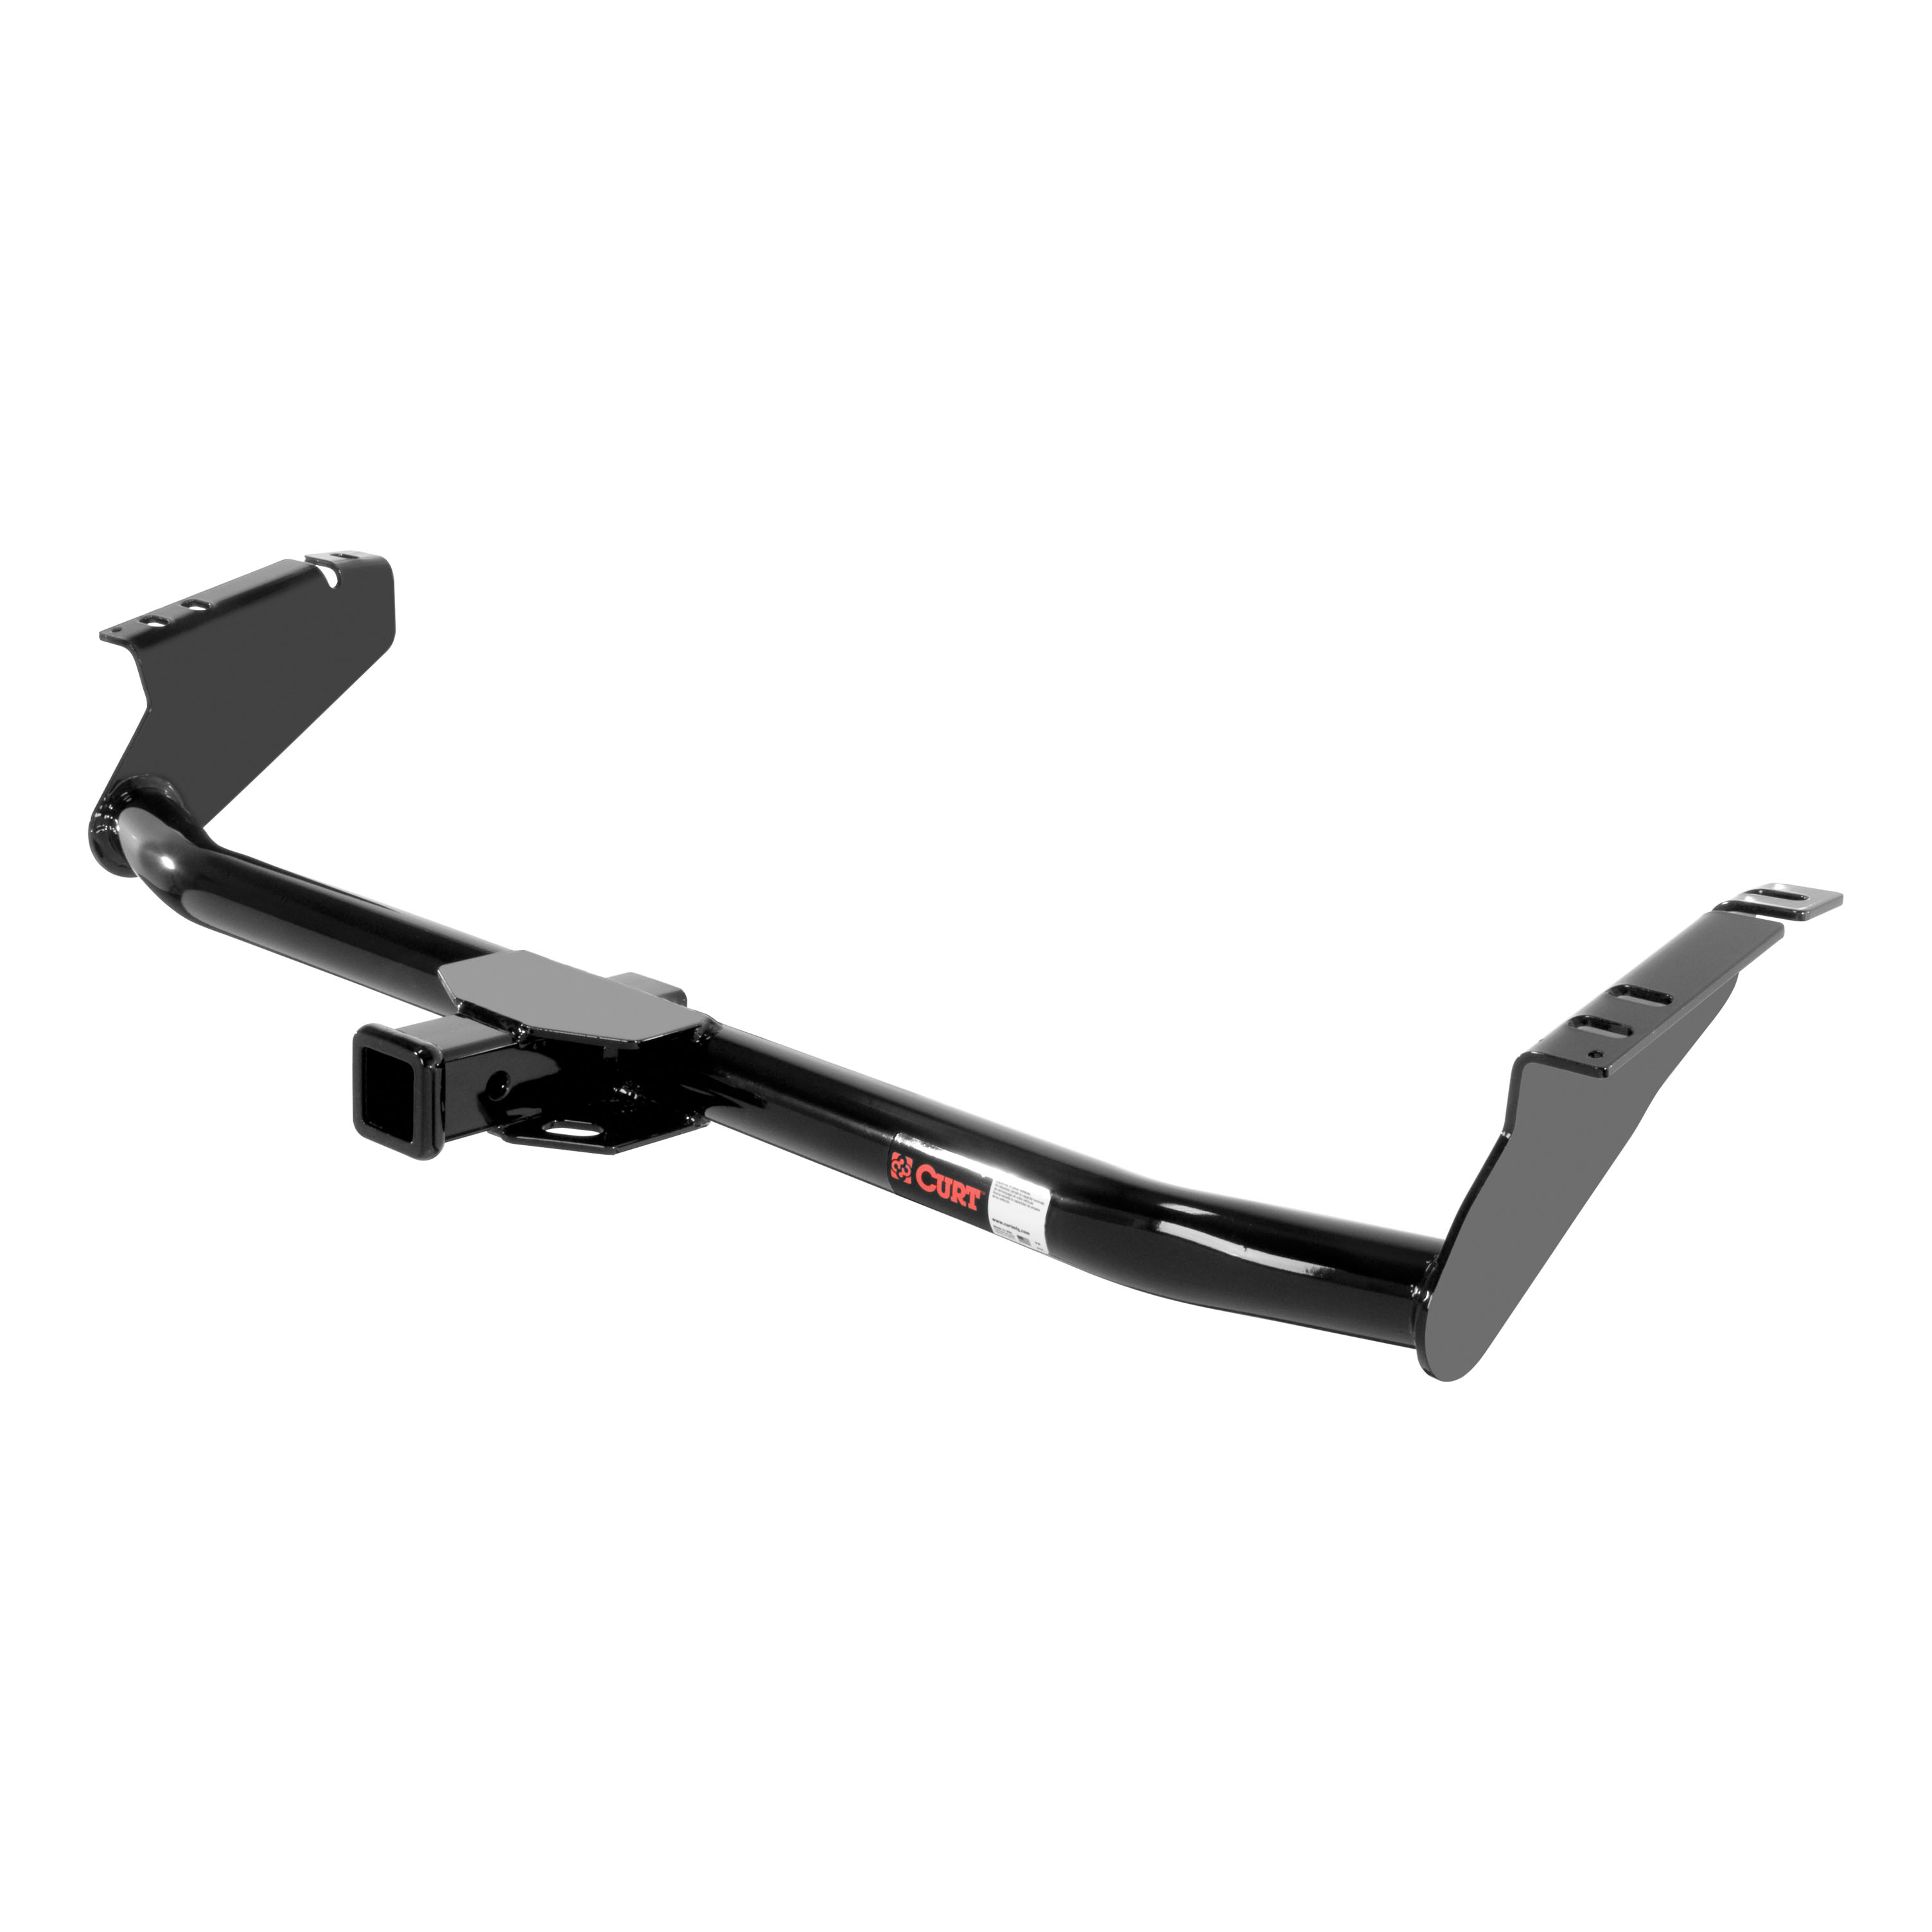 CURT Class 3 Trailer Hitch, 2" Receiver, Select Toyota Sienna (Exposed Main Body) Trailer Hitch